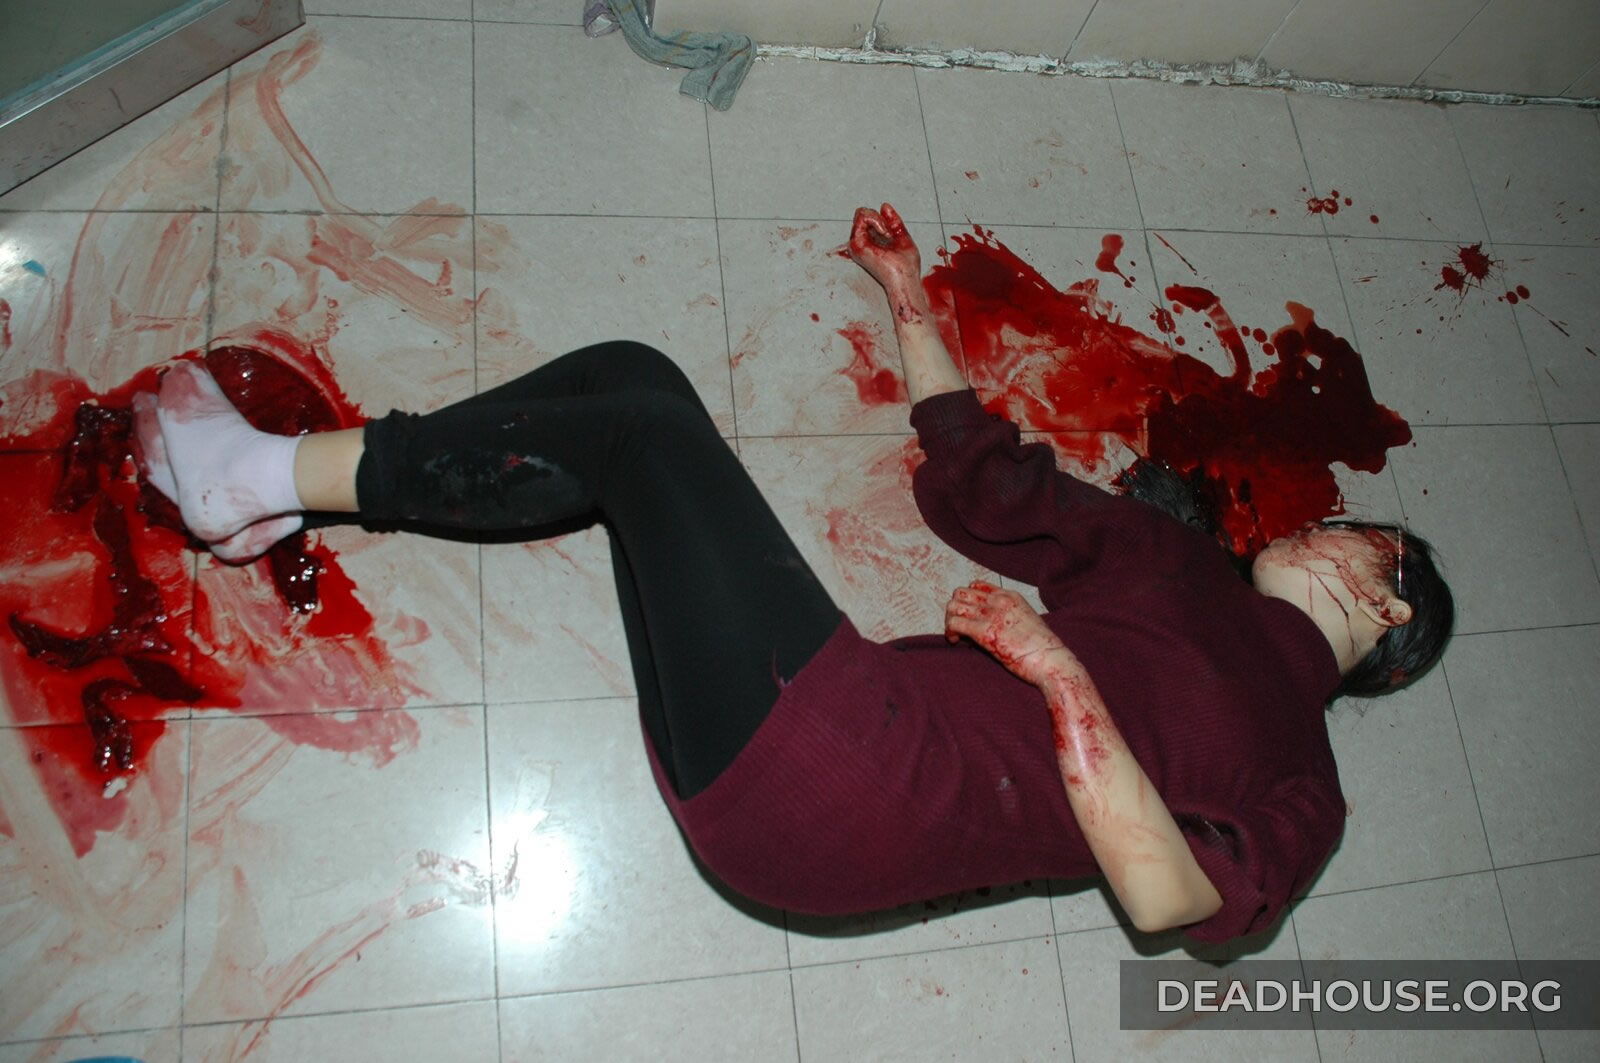 Corpse of a beautiful girl covered in blood